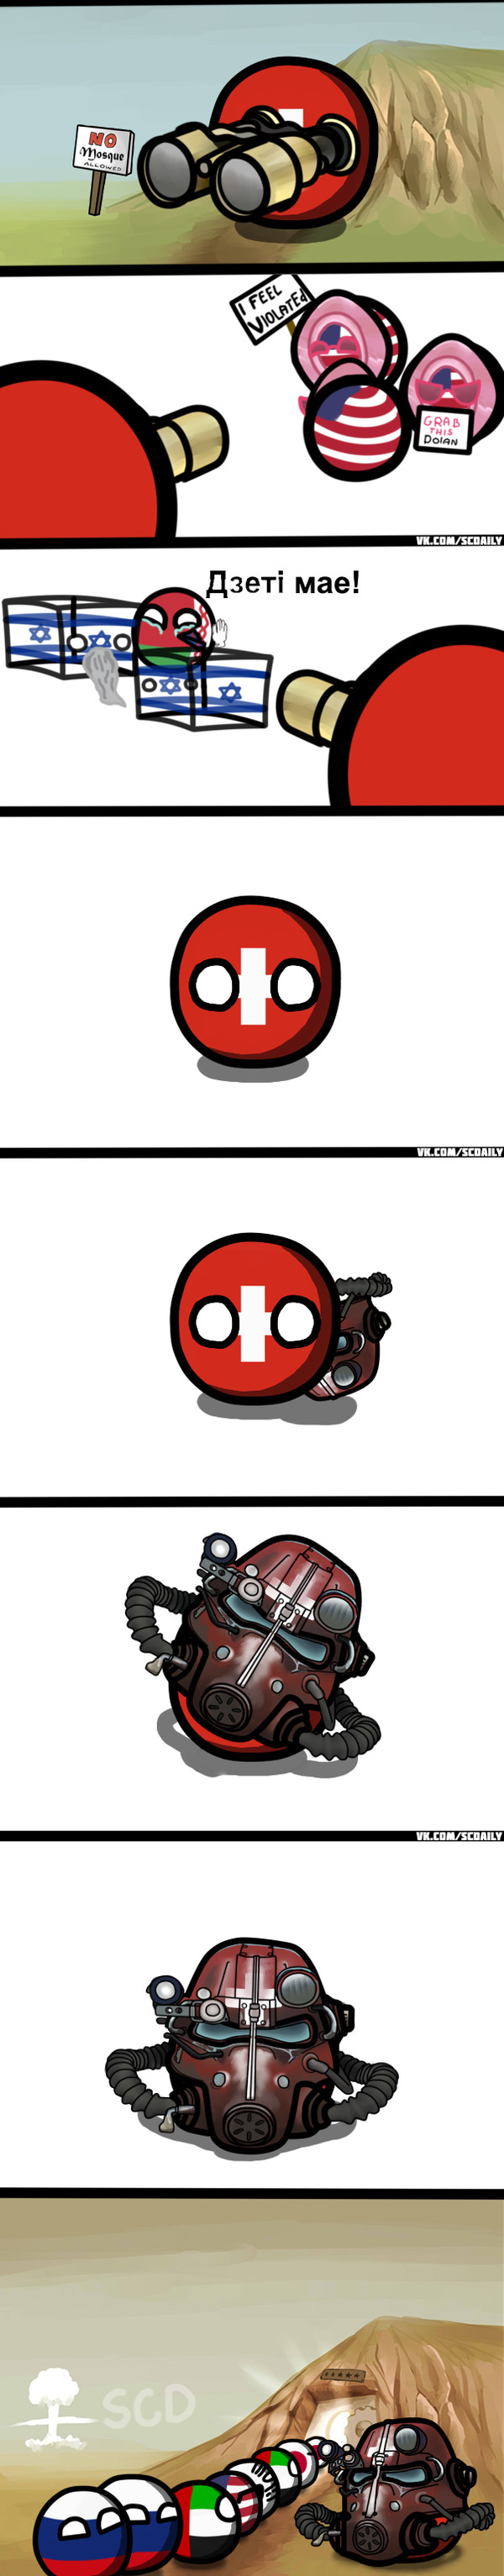 Something went wrong, or a little funny about the countries. - Longpost, Israel, Republic of Belarus, Scdaily, Scd, , Switzerland, Countryballs, My